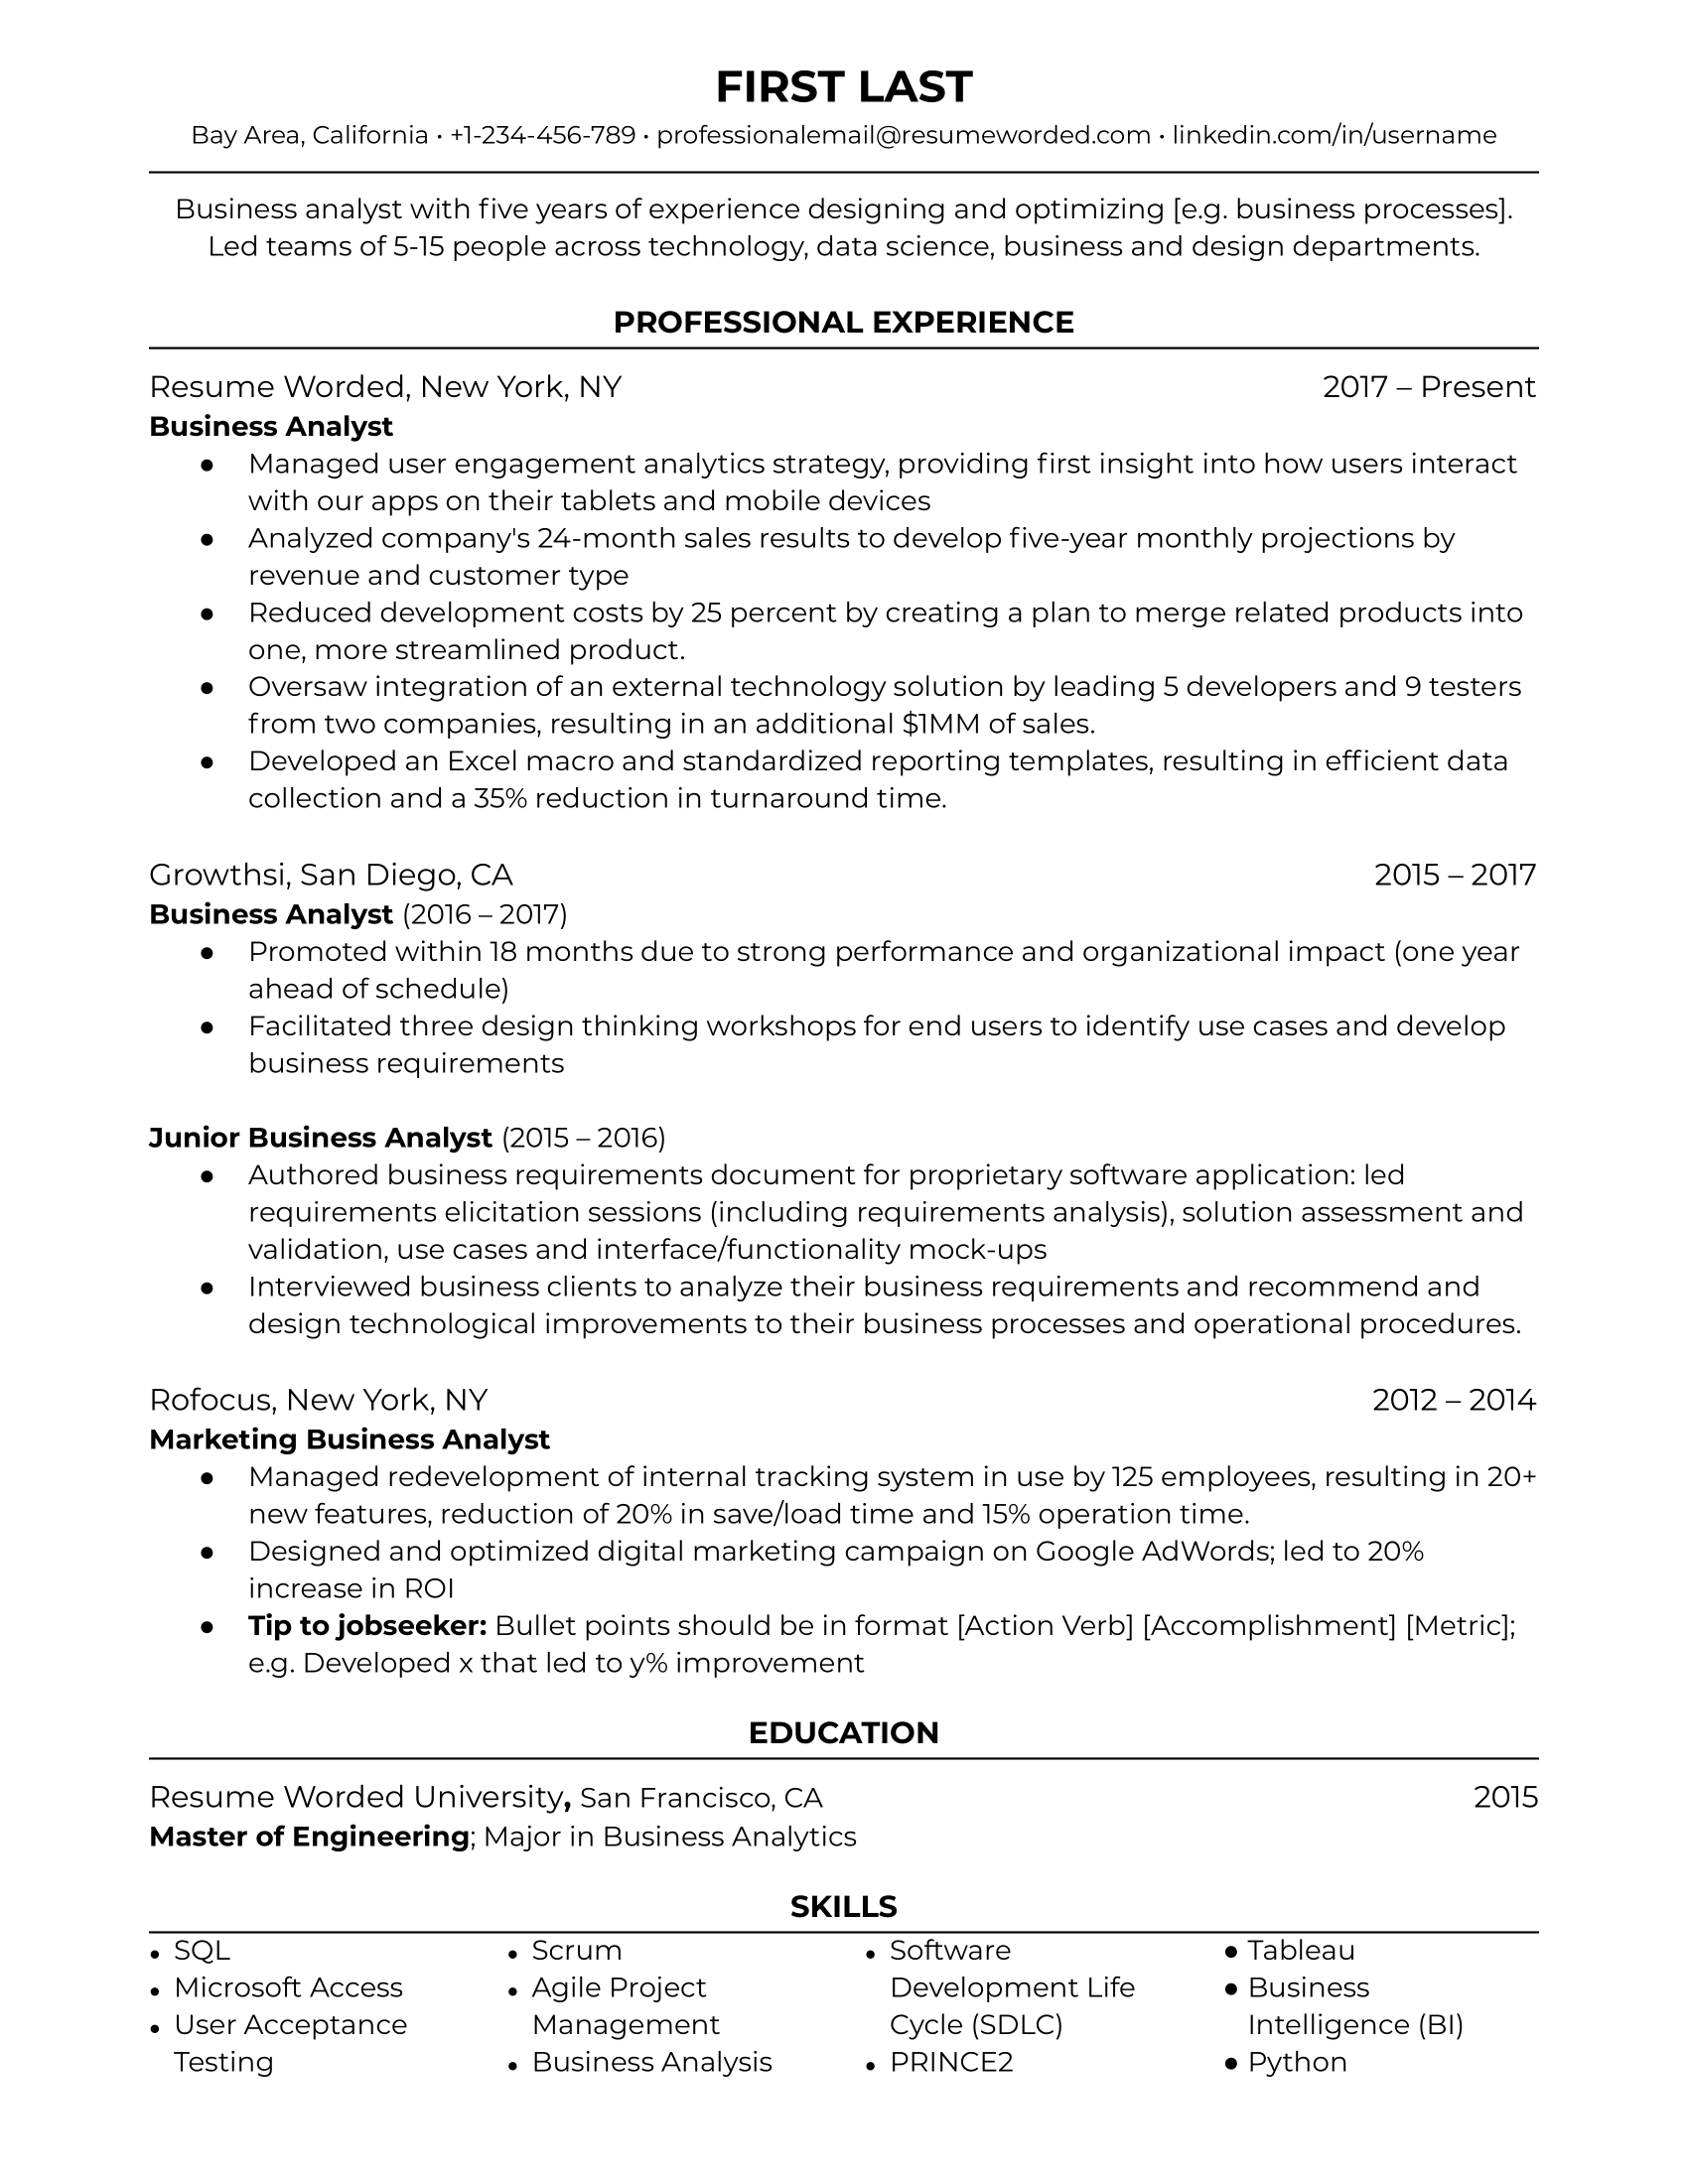 A business analyst resume template incorporating relevant action verbs. 